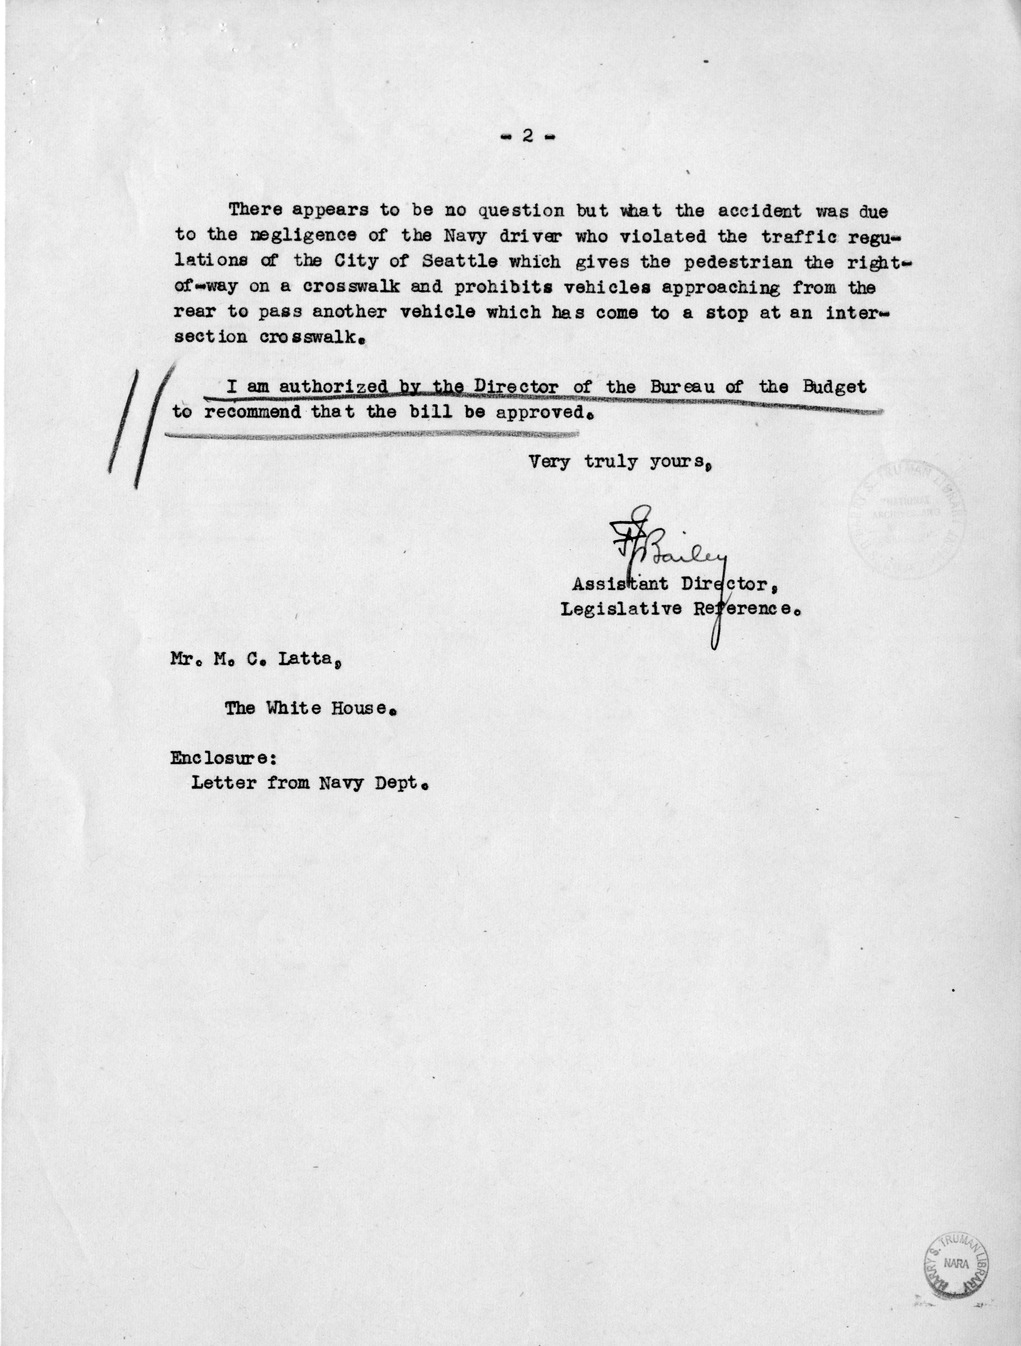 Memorandum from Frederick J. Bailey to M. C. Latta, S. 542, For the Relief of Mrs. Minnie A. Beltz, with Attachments